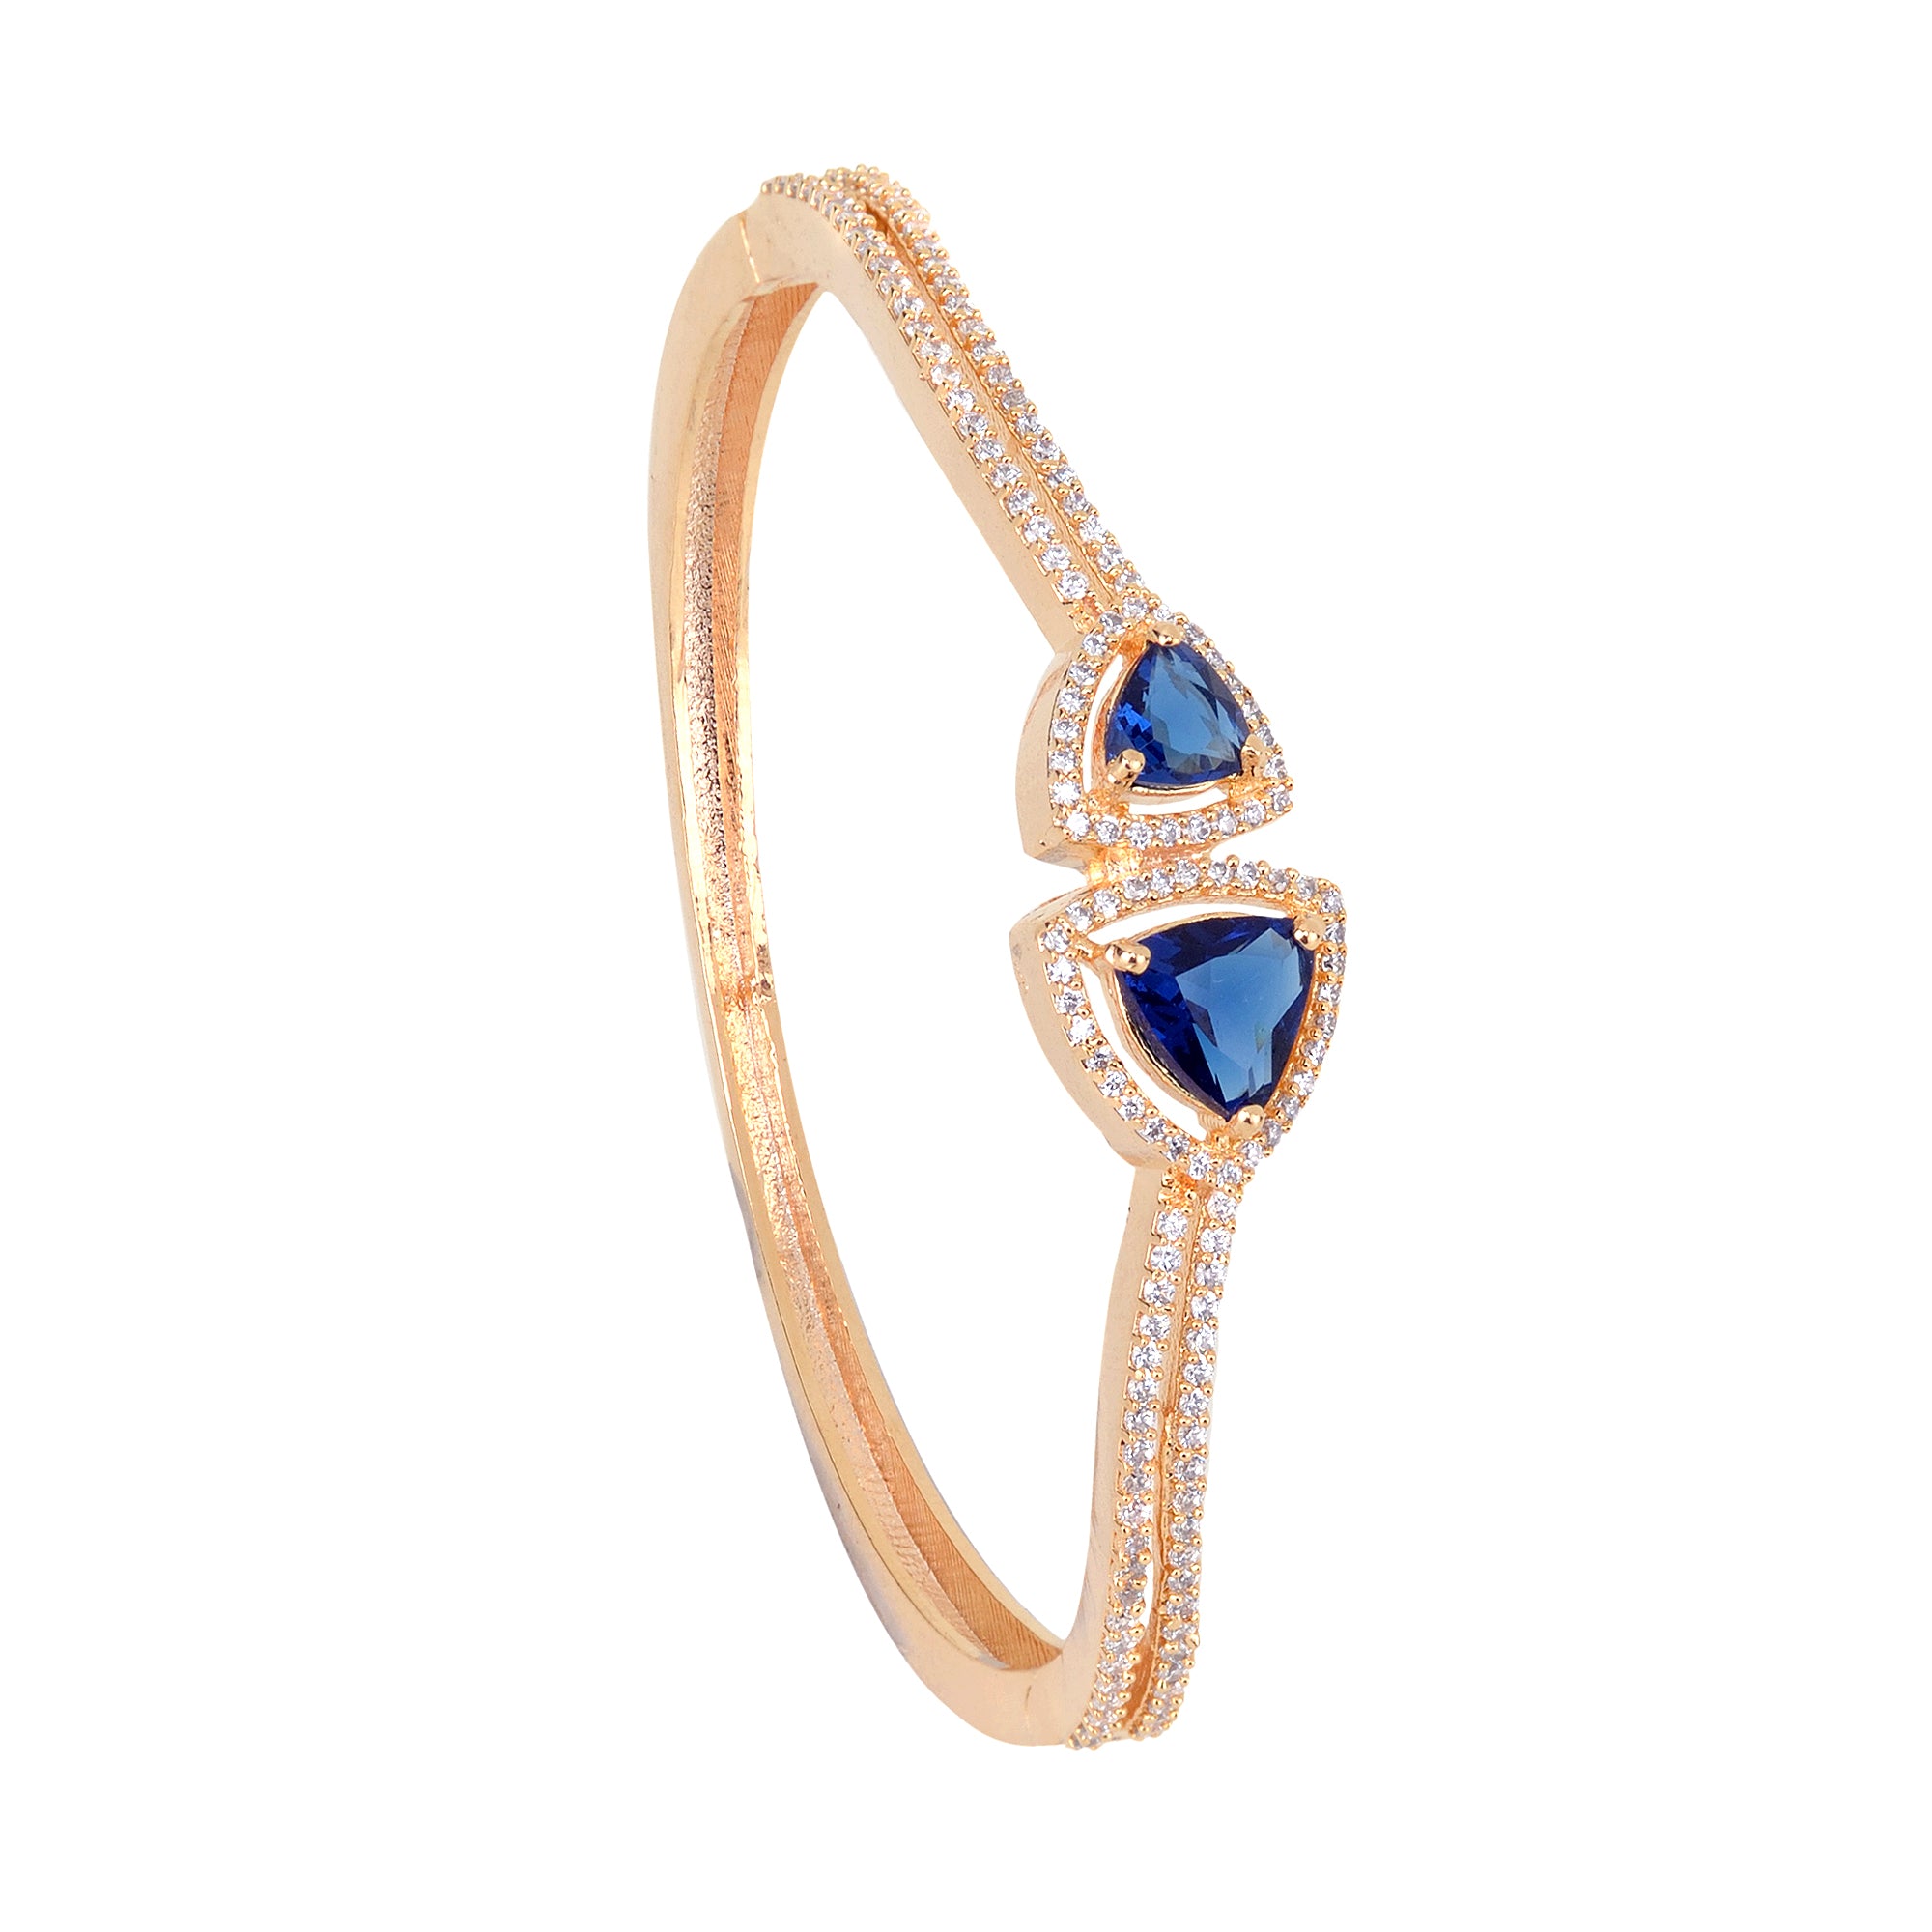 Gold Plated Blue American Diamond Handcrafted Bracelet For Women And Girls - Saraf Rs Jewellery